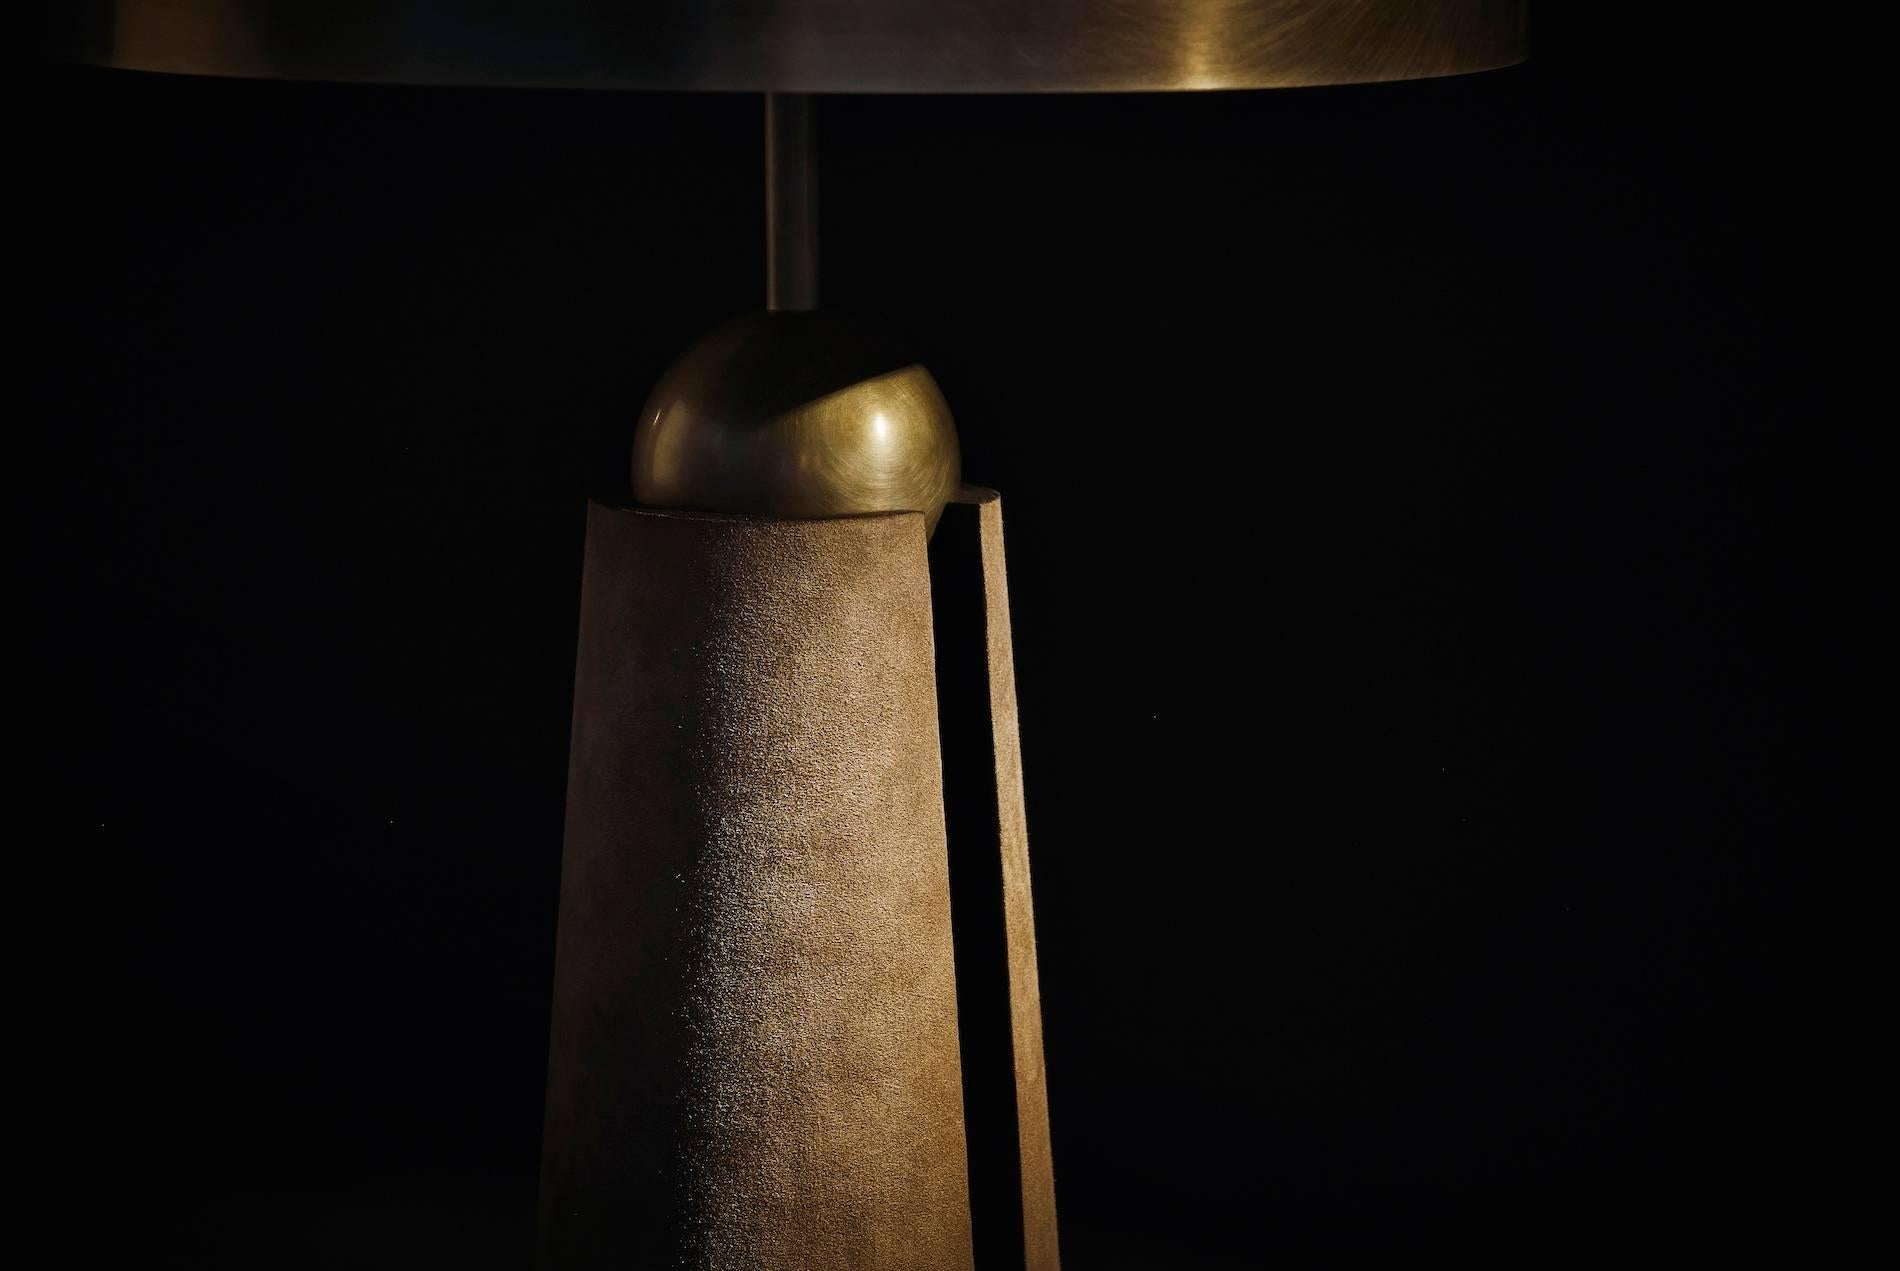 The Metronome series evokes the measure and balance of its namesake. A patinated brass sphere perches atop the conical base, which is hand wrapped in calf suede to provide a lush tactile contrast. A channel in the firmly grounded base reveals an